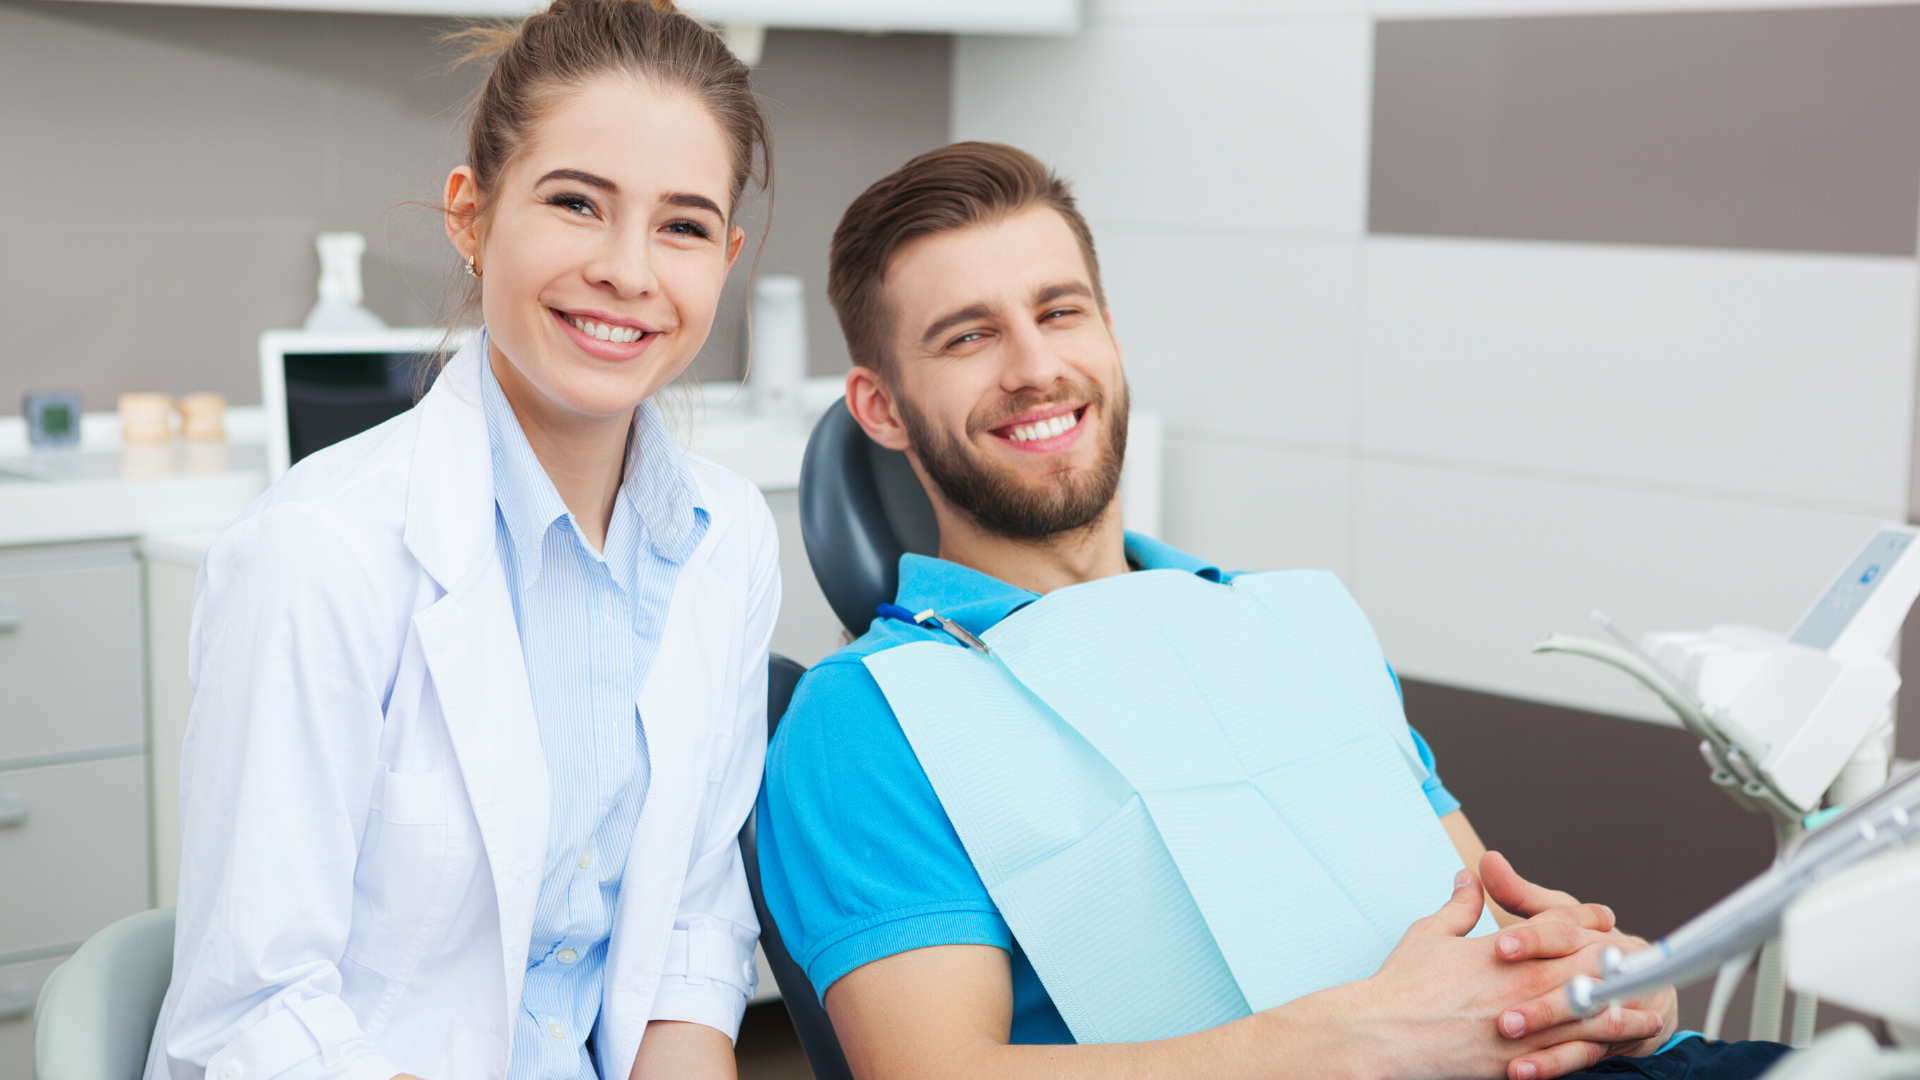 Important Things You Should Consider When Choosing a Dentist